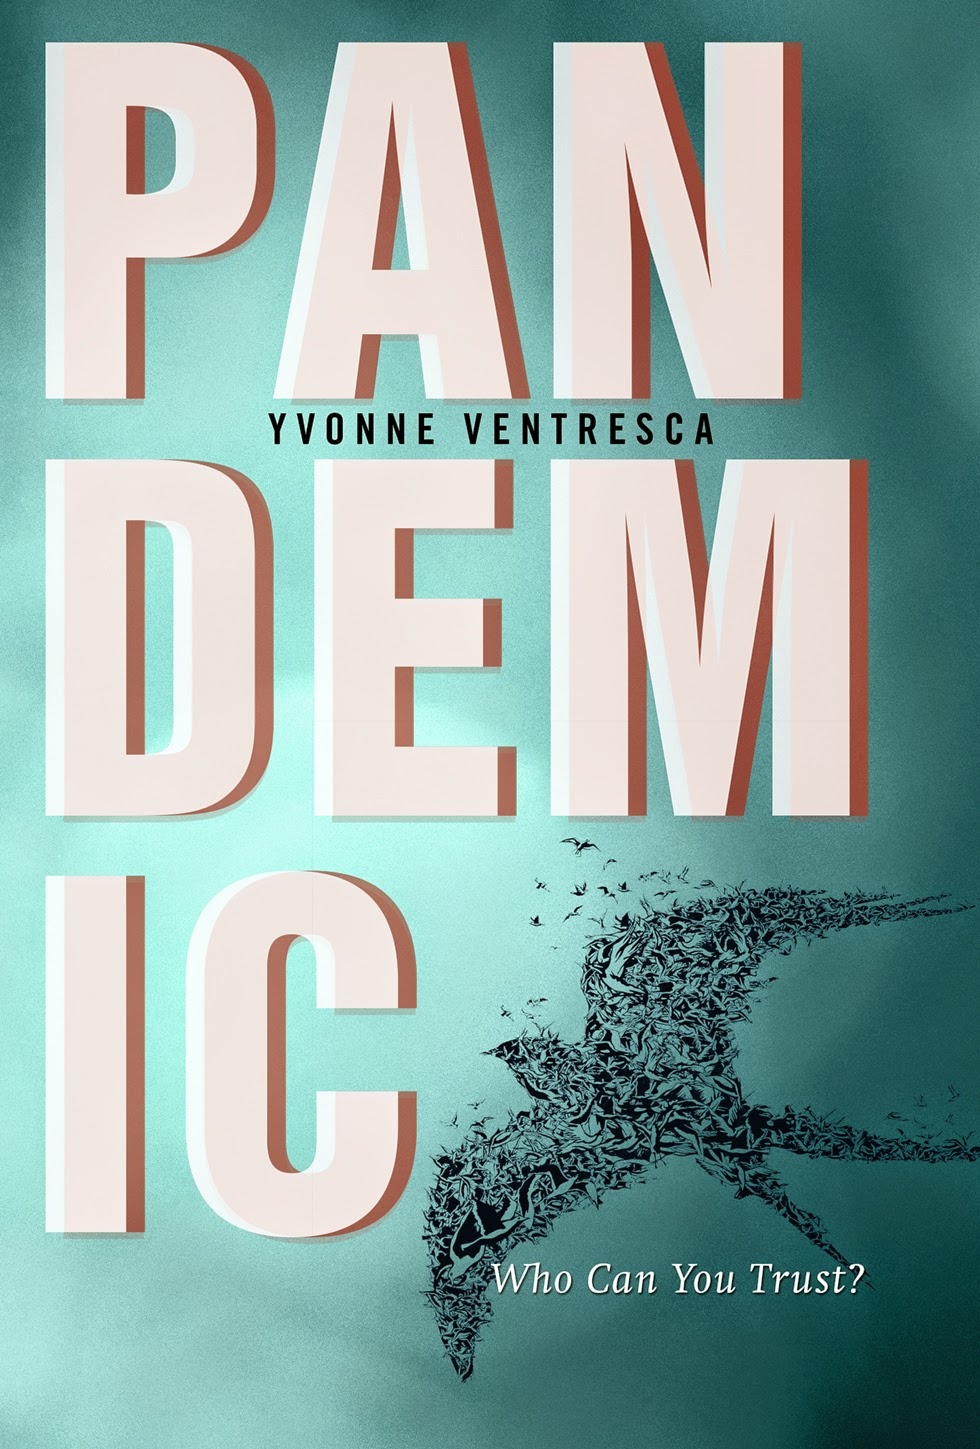 New Voice: Yvonne Ventresca on Pandemic